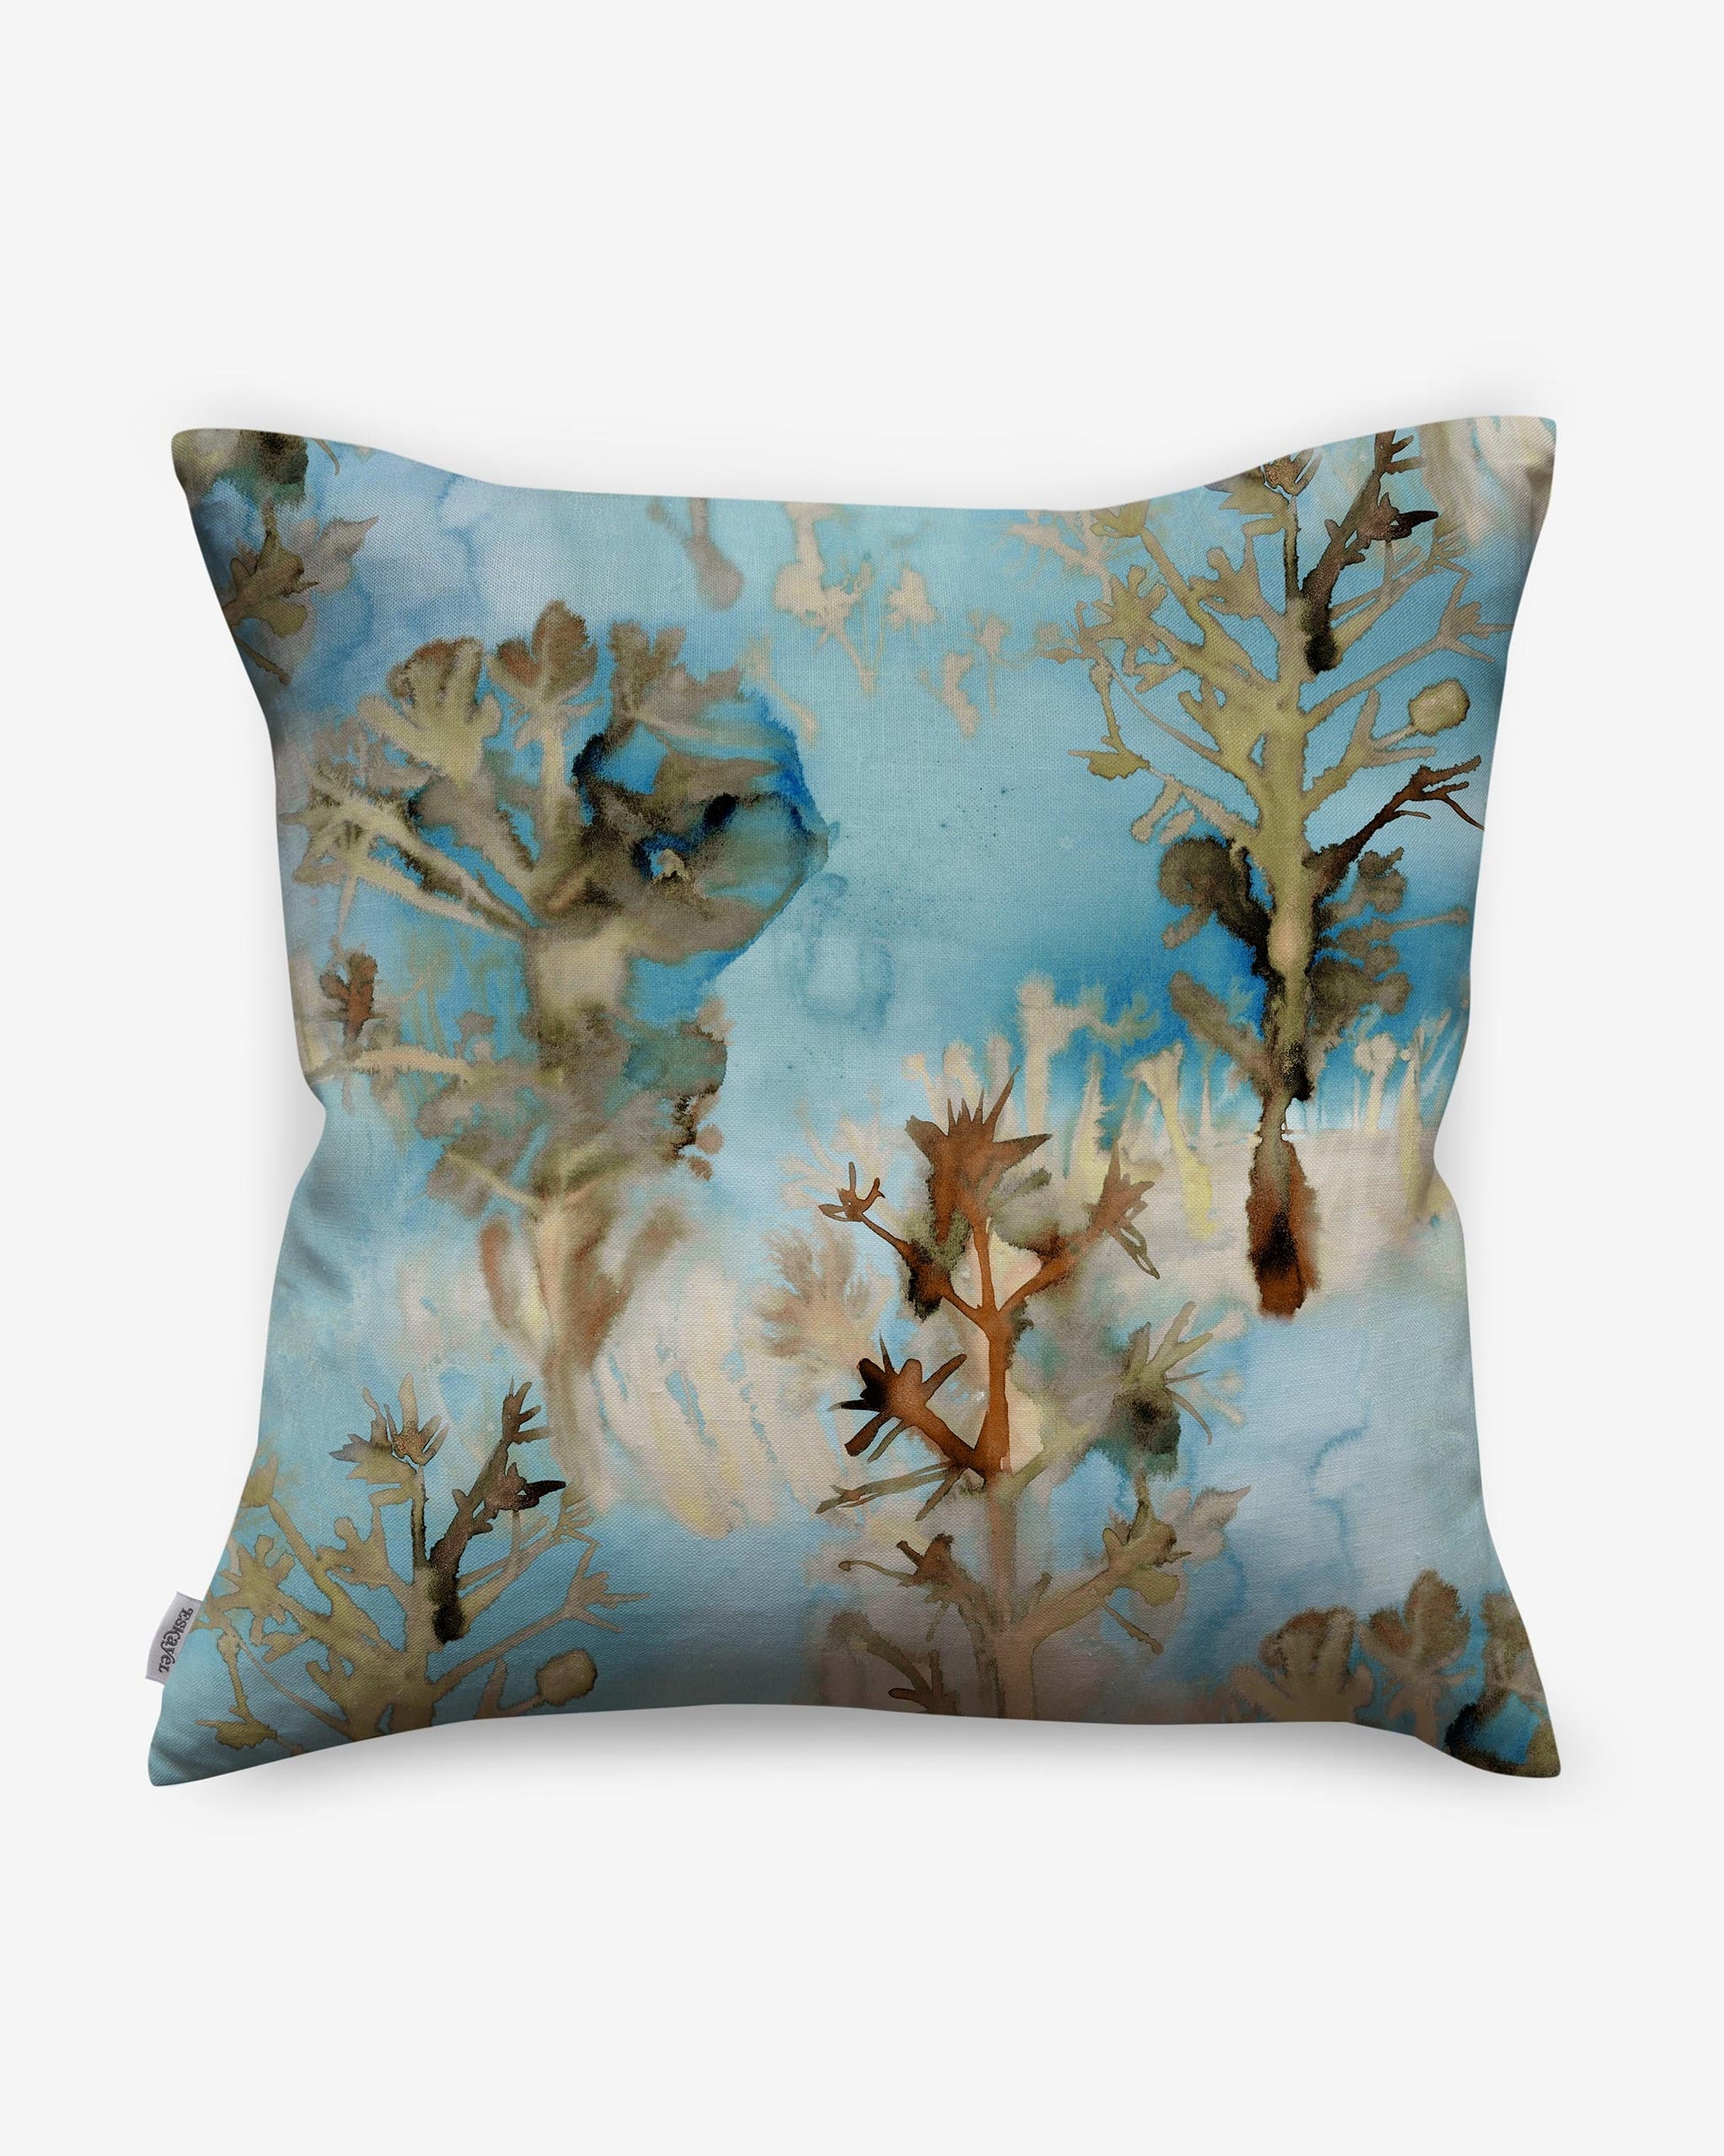 An Aionas Pillow with a tree on it is the perfect addition to your decor.